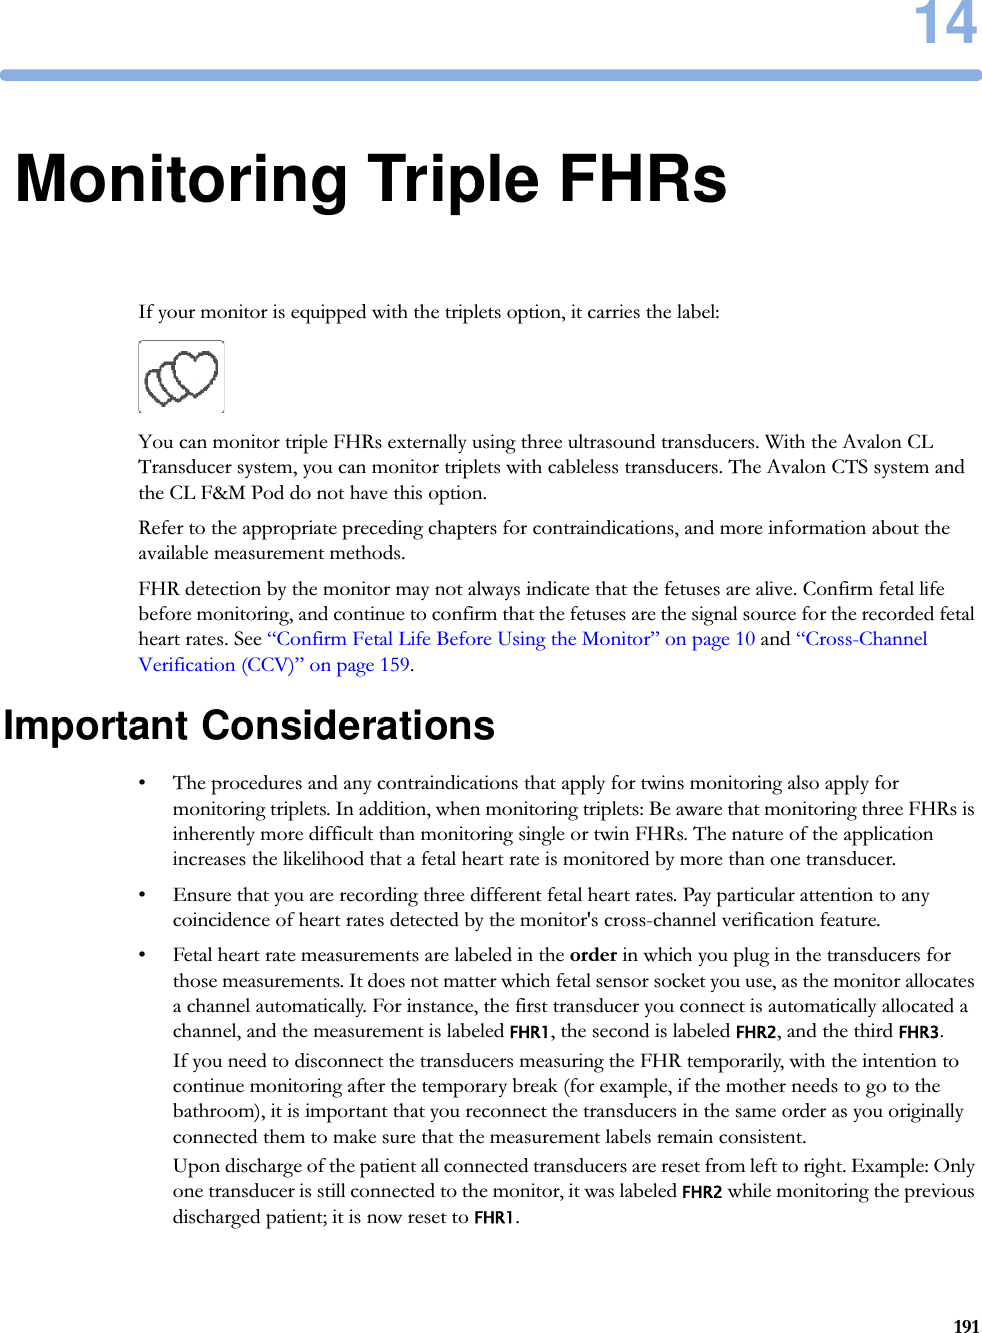 1419114Monitoring Triple FHRsIf your monitor is equipped with the triplets option, it carries the label: You can monitor triple FHRs externally using three ultrasound transducers. With the Avalon CL Transducer system, you can monitor triplets with cableless transducers. The Avalon CTS system and the CL F&amp;M Pod do not have this option.Refer to the appropriate preceding chapters for contraindications, and more information about the available measurement methods.FHR detection by the monitor may not always indicate that the fetuses are alive. Confirm fetal life before monitoring, and continue to confirm that the fetuses are the signal source for the recorded fetal heart rates. See “Confirm Fetal Life Before Using the Monitor” on page 10 and “Cross-Channel Verification (CCV)” on page 159.Important Considerations• The procedures and any contraindications that apply for twins monitoring also apply for monitoring triplets. In addition, when monitoring triplets: Be aware that monitoring three FHRs is inherently more difficult than monitoring single or twin FHRs. The nature of the application increases the likelihood that a fetal heart rate is monitored by more than one transducer.• Ensure that you are recording three different fetal heart rates. Pay particular attention to any coincidence of heart rates detected by the monitor&apos;s cross-channel verification feature.• Fetal heart rate measurements are labeled in the order in which you plug in the transducers for those measurements. It does not matter which fetal sensor socket you use, as the monitor allocates a channel automatically. For instance, the first transducer you connect is automatically allocated a channel, and the measurement is labeled FHR1, the second is labeled FHR2, and the third FHR3.If you need to disconnect the transducers measuring the FHR temporarily, with the intention to continue monitoring after the temporary break (for example, if the mother needs to go to the bathroom), it is important that you reconnect the transducers in the same order as you originally connected them to make sure that the measurement labels remain consistent.Upon discharge of the patient all connected transducers are reset from left to right. Example: Only one transducer is still connected to the monitor, it was labeled FHR2 while monitoring the previous discharged patient; it is now reset to FHR1.